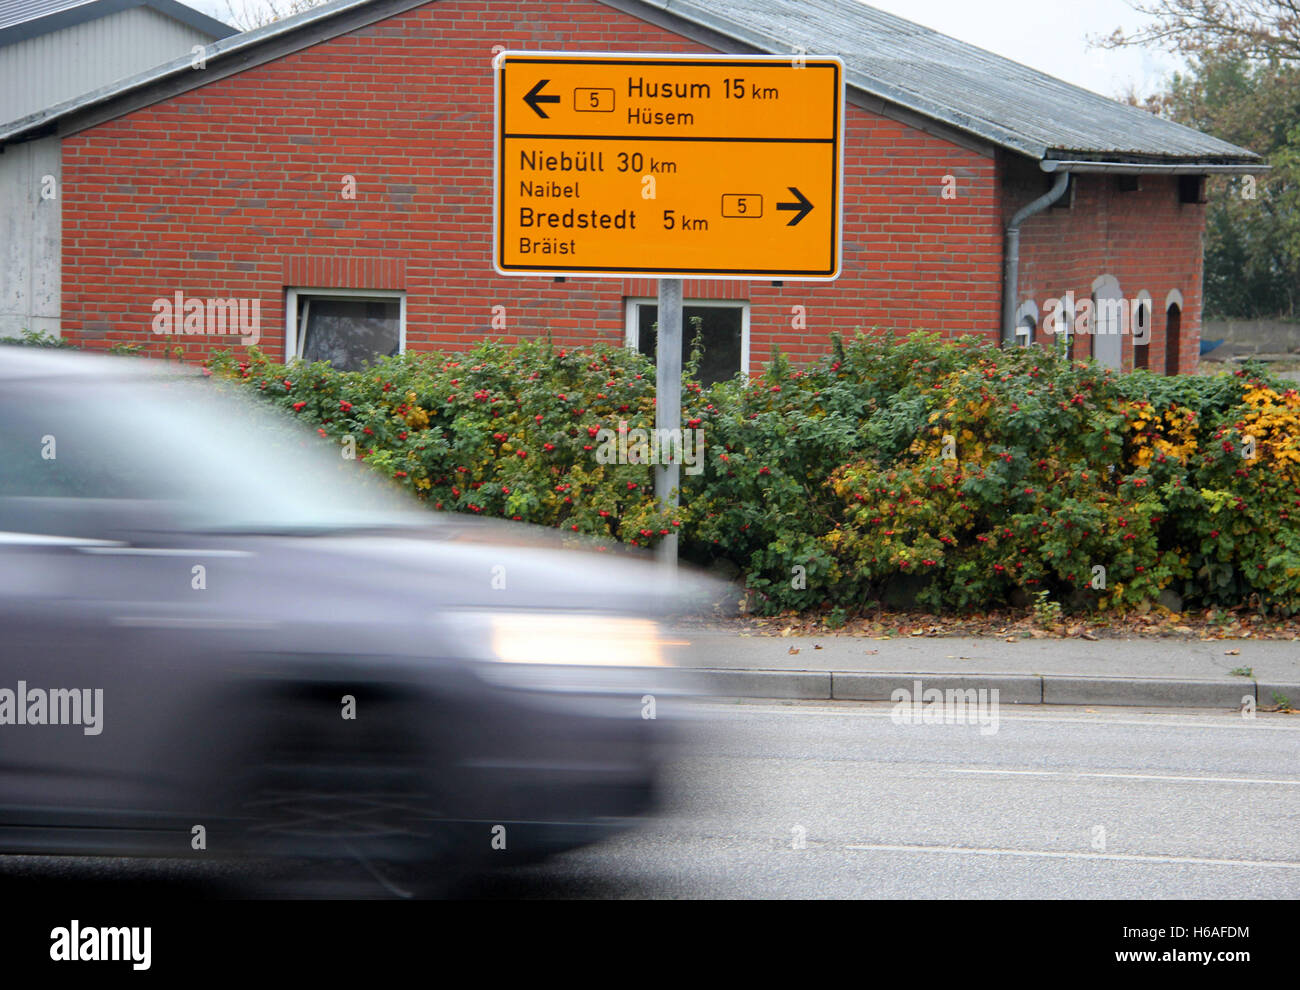 Struckum, Germany. 26th Oct, 2016. A dual-language sign written in German and Frisian can be seen on Federal Road 5 at the entrance to Struckum, Germany, 26 October 2016. In the district of North Frisia and on the island of Heligoland, Frisian is, next to German, the second administrative language. Photo: WOLFGANG RUNGE/dpa/Alamy Live News Stock Photo